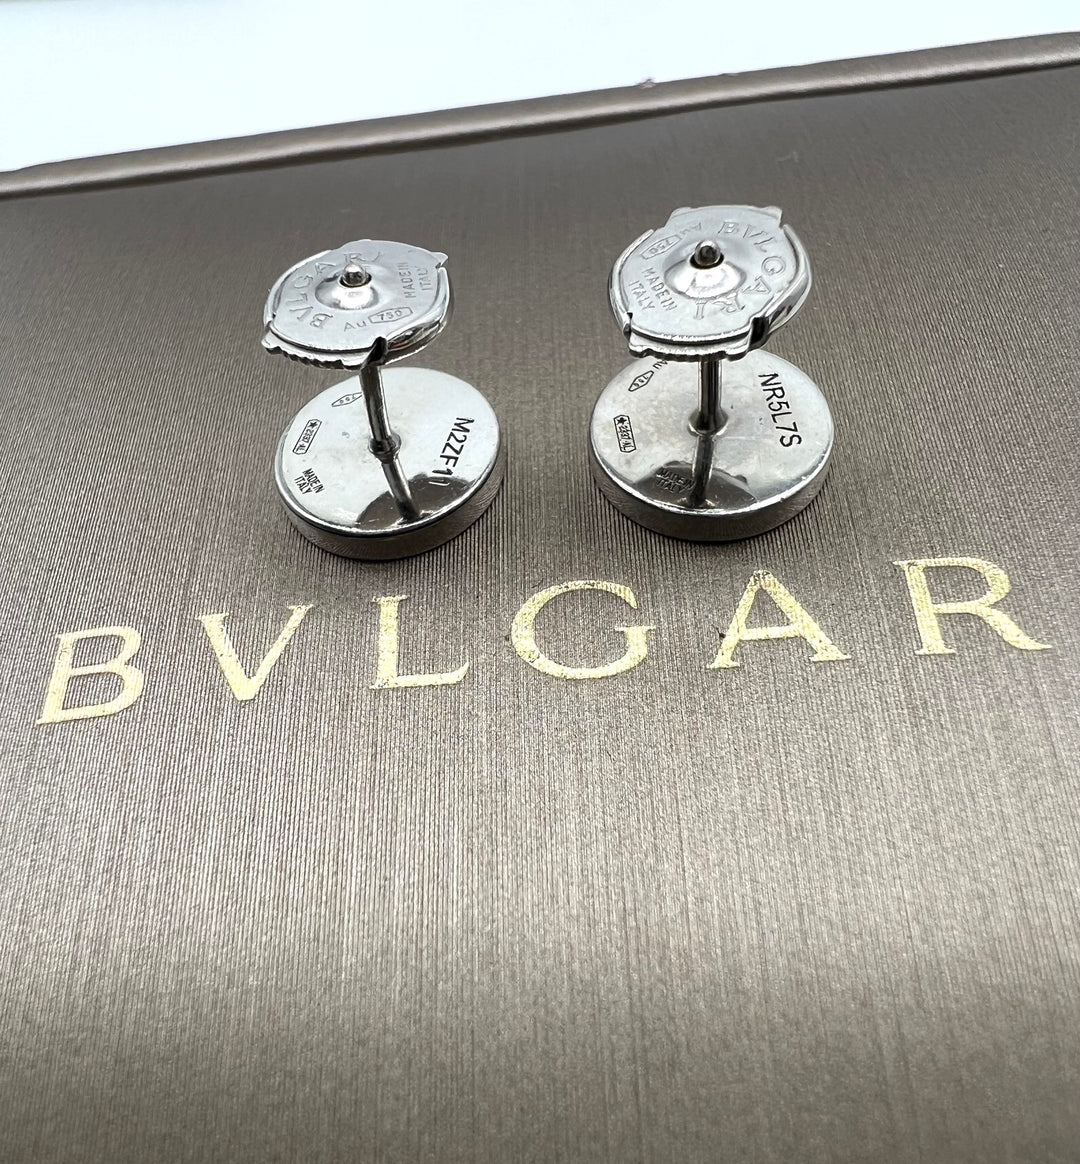 BVLGARI 750 WHITE GOLD
PAIR OF EARRINGS WITH BLACK
ONYX ELEMENT